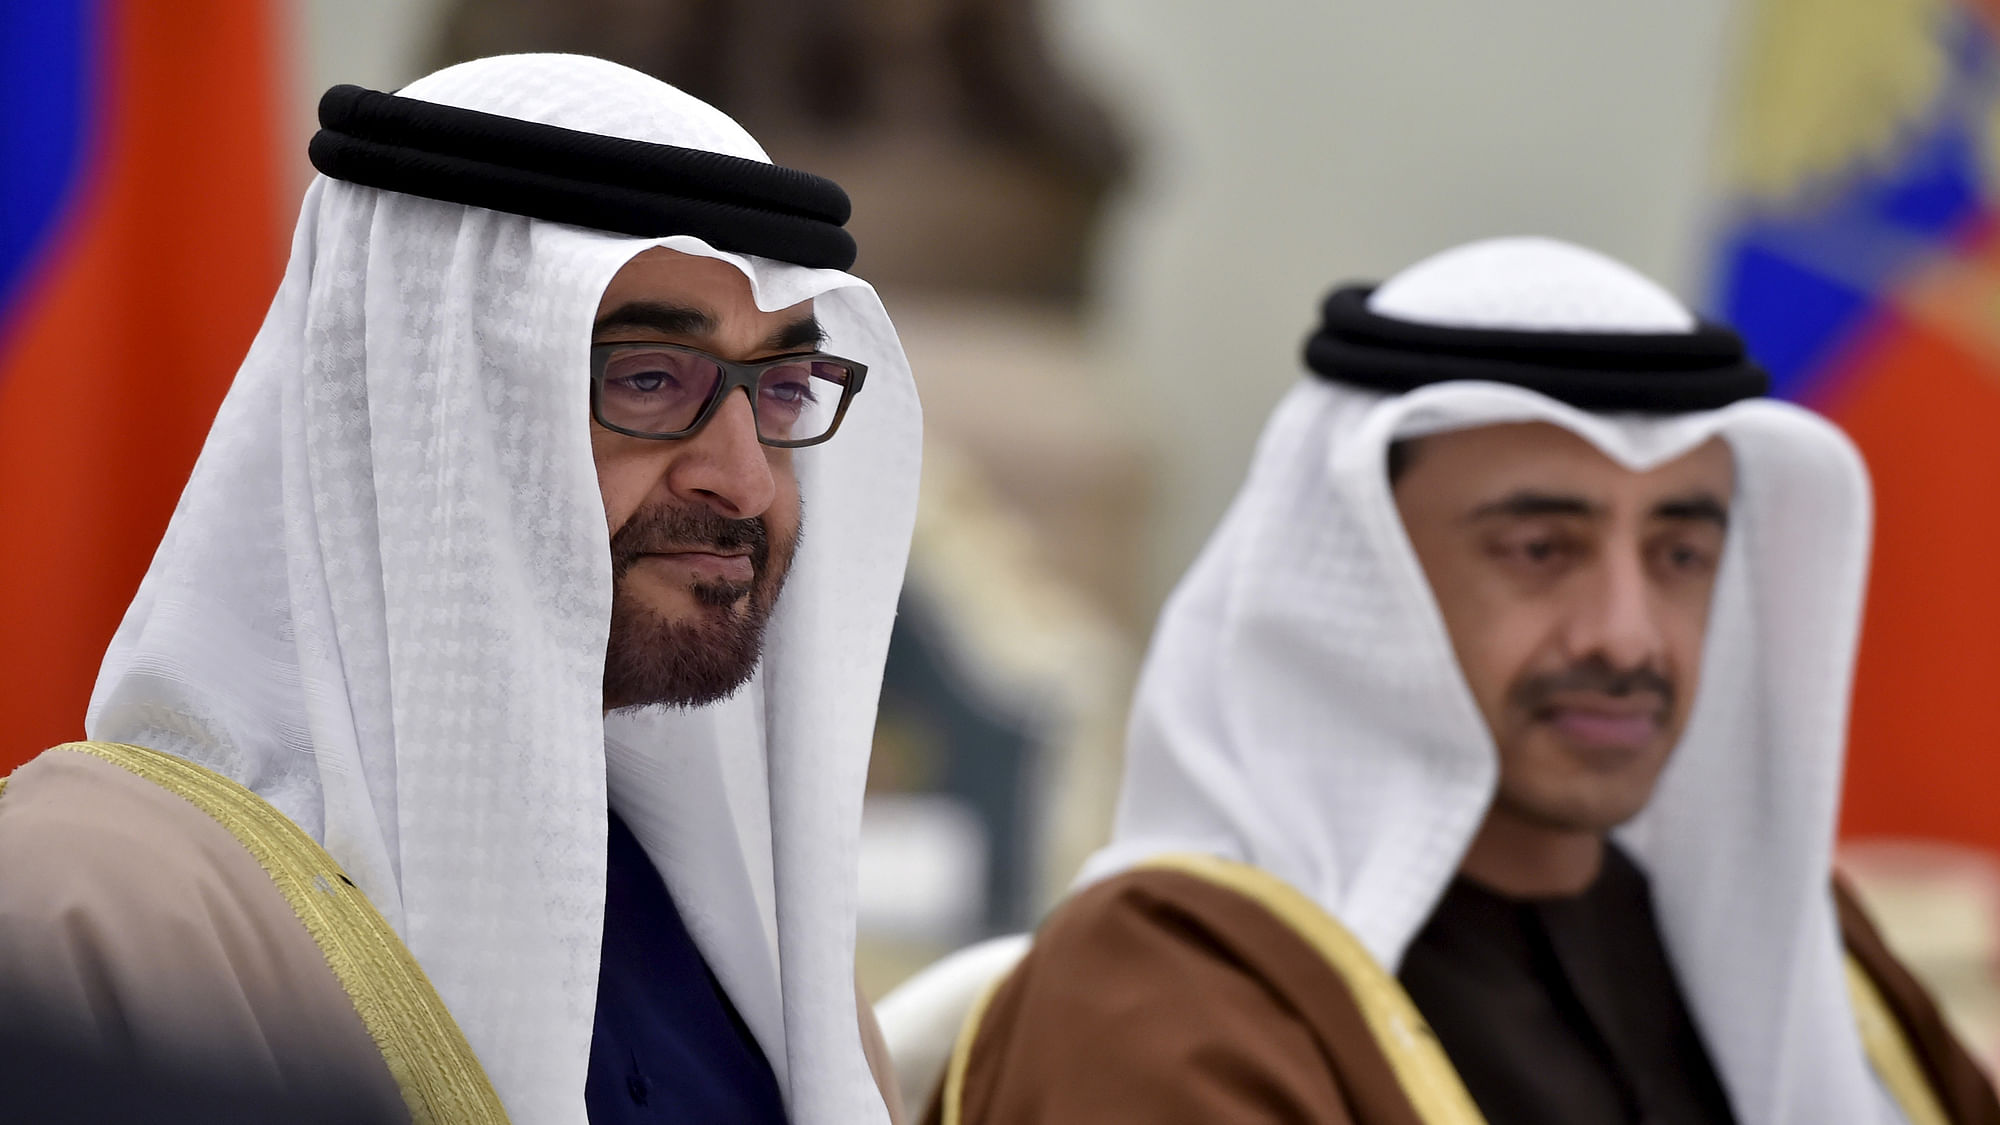 Sheikh Mohammed bin Zayed al-Nahyan (L), Crown Prince of Abu Dhabi and UAE’s Deputy Commander-in-Chief of the armed forces. (Photo: Reuters)